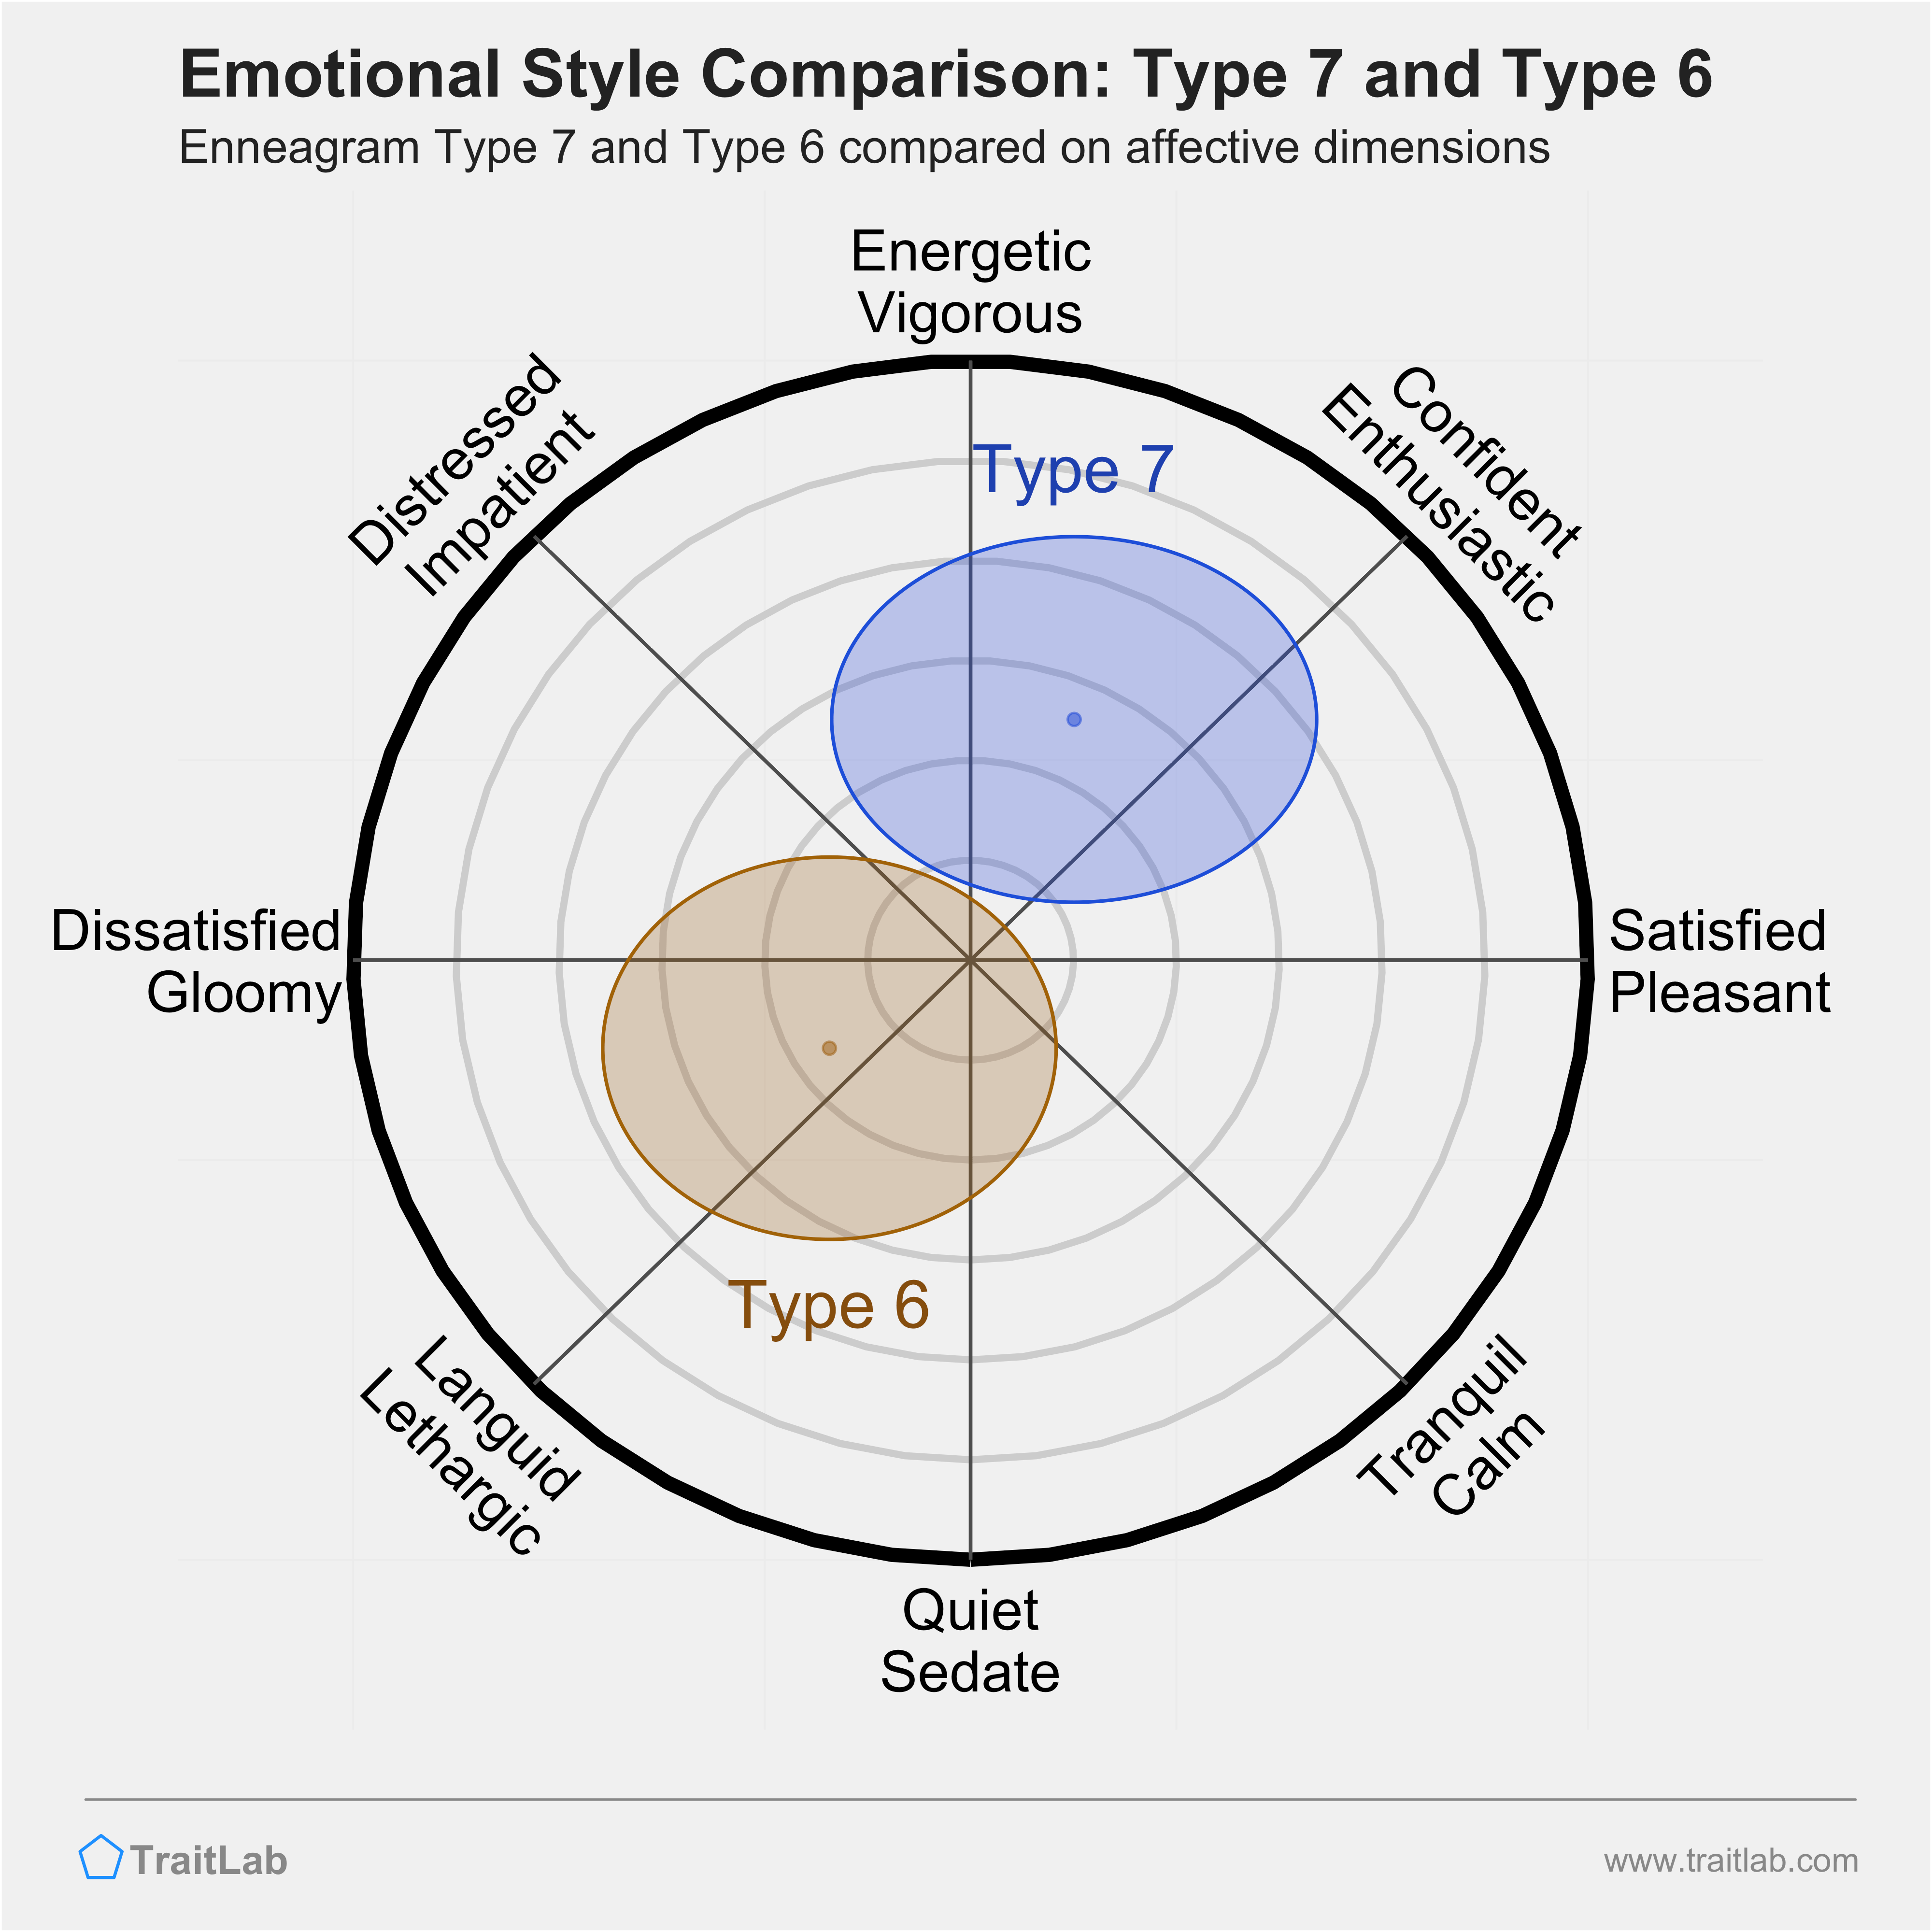 Type 7 and Type 6 comparison across emotional (affective) dimensions